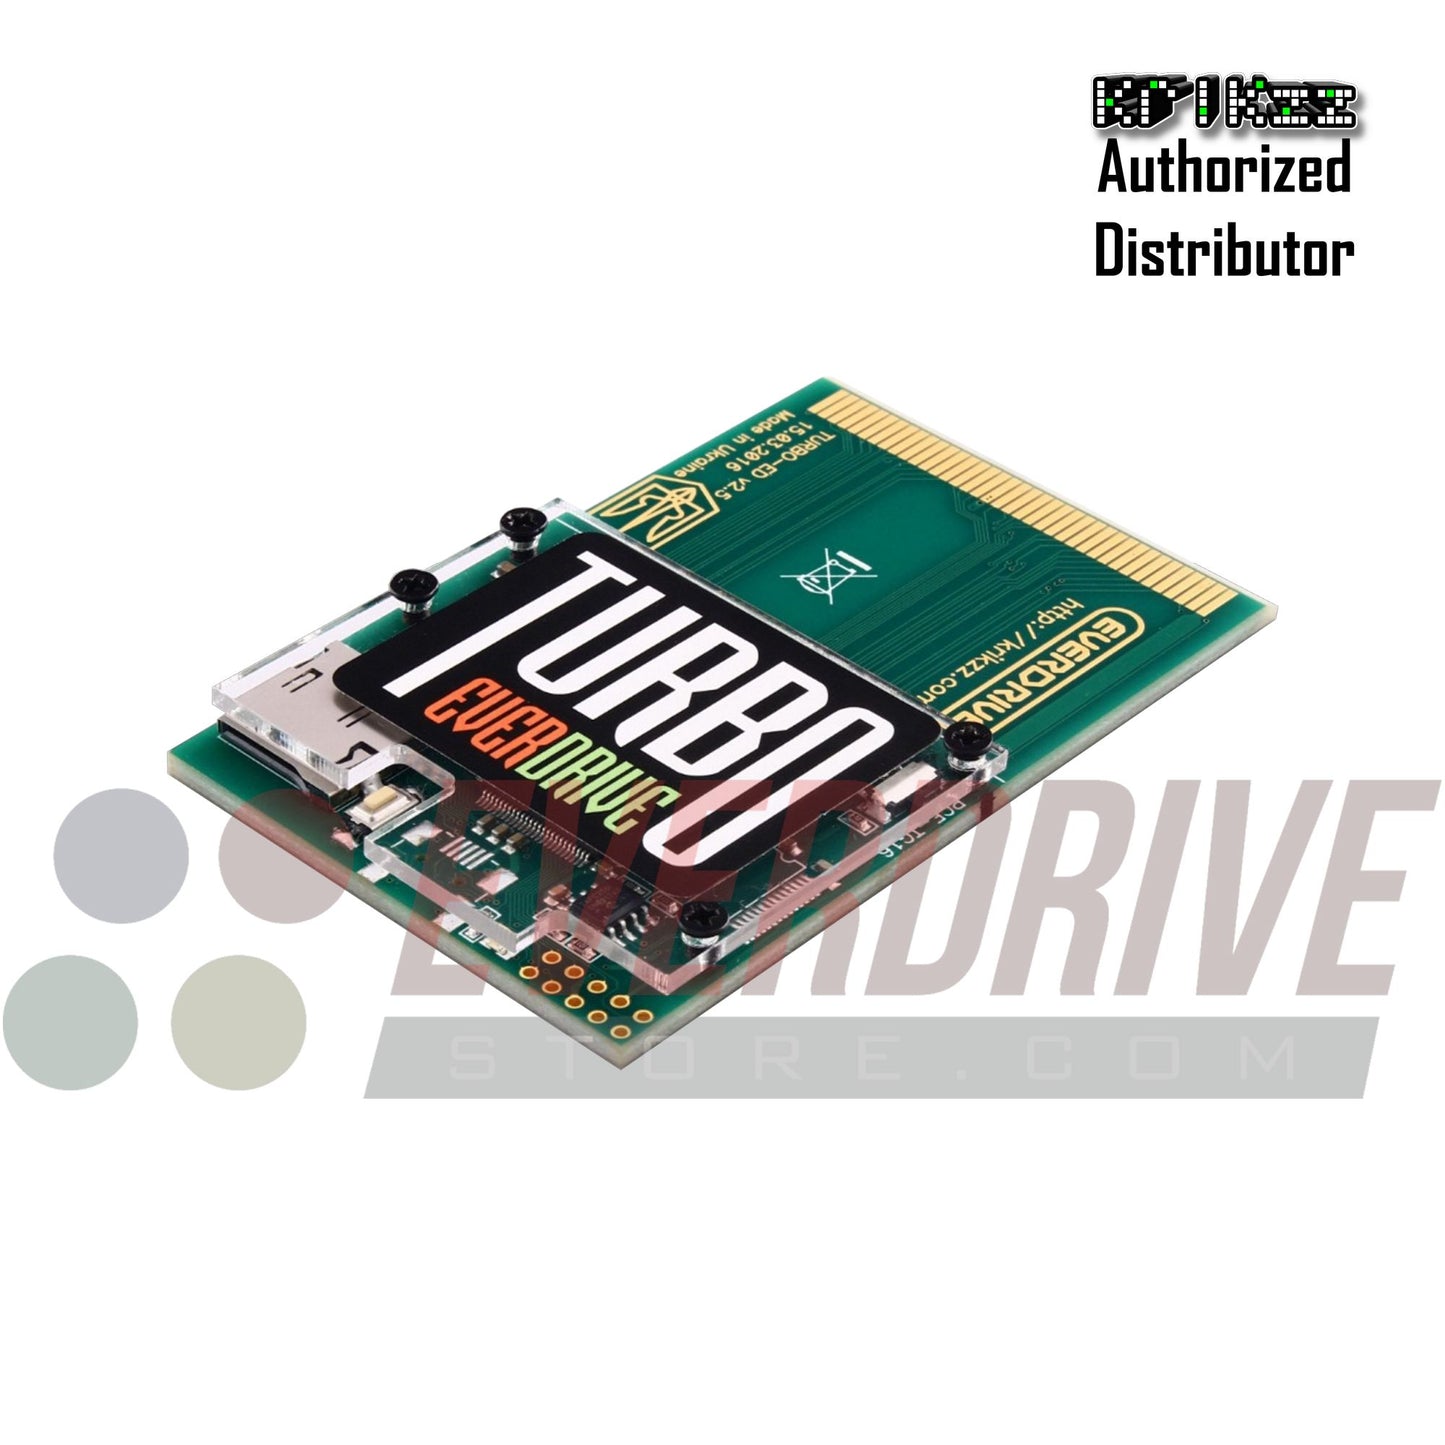 Everdrive Turbo V2.5 - With Shell